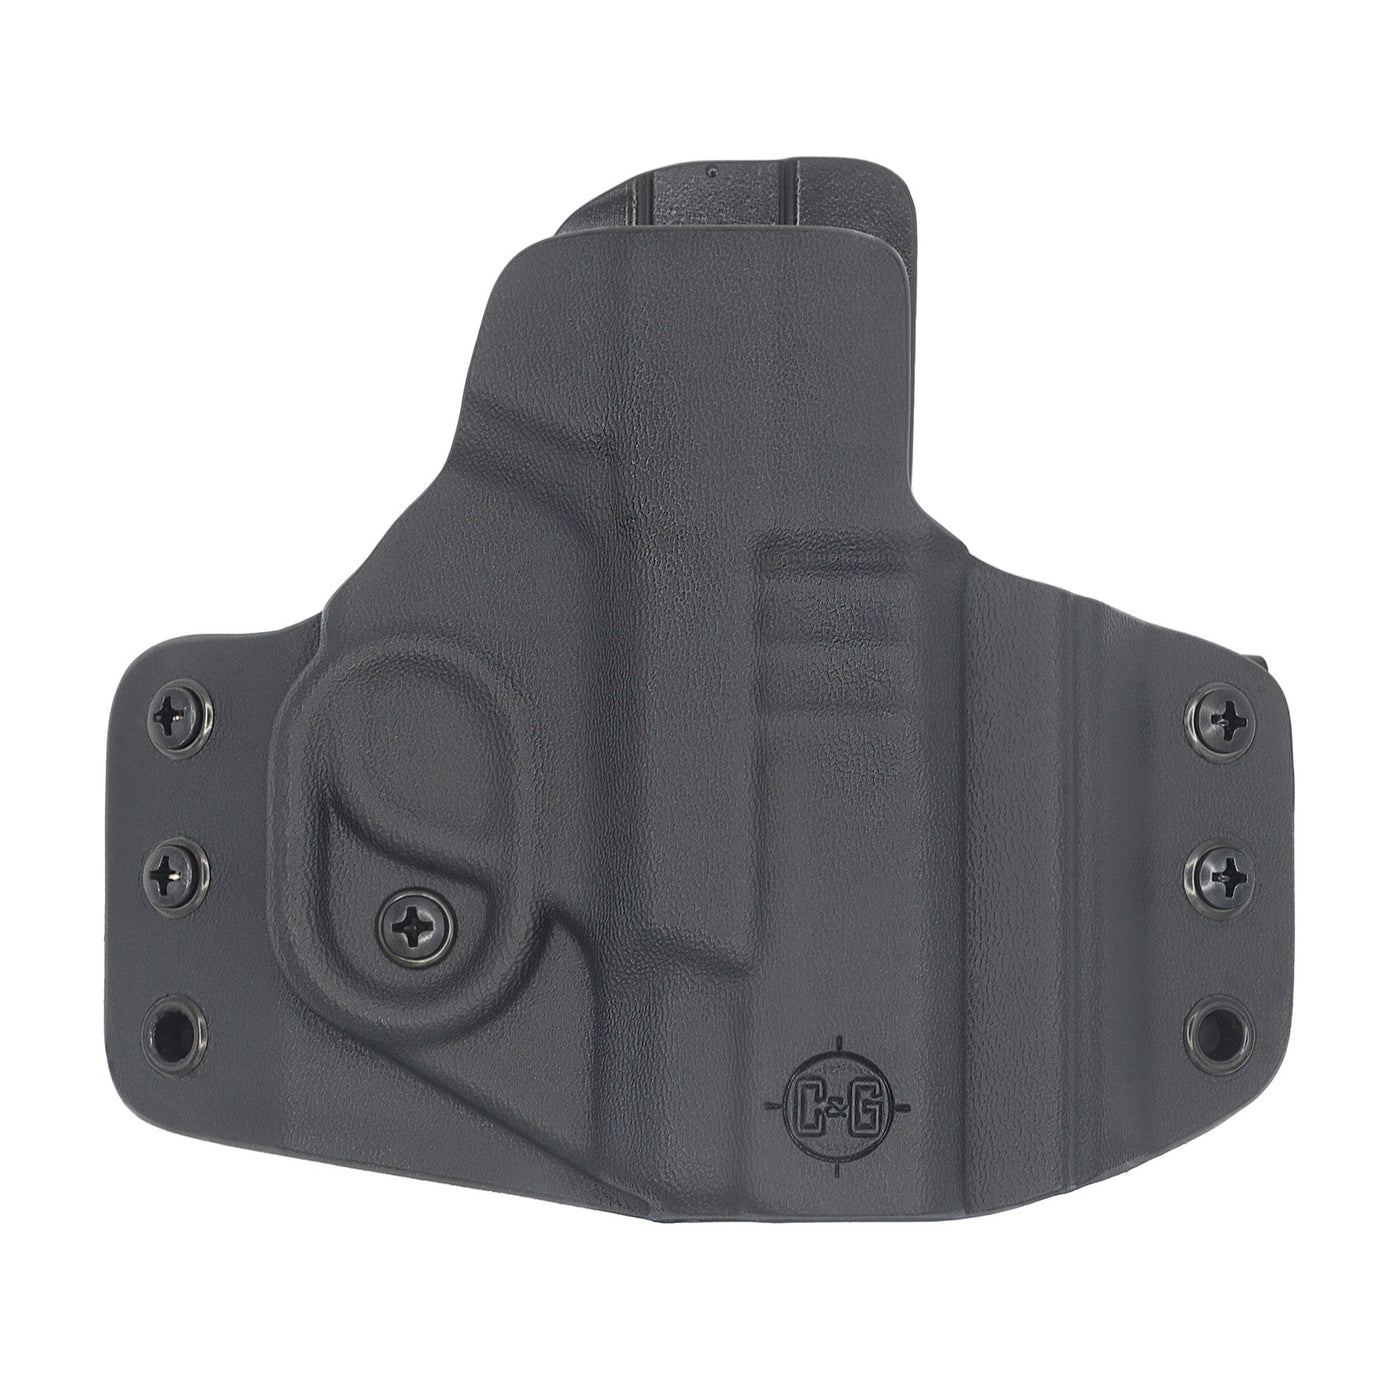 C&G Holsters quick ship Covert OWB kydex holster for Smith & Wesson M&P Shield 9/40 in black front view without gun